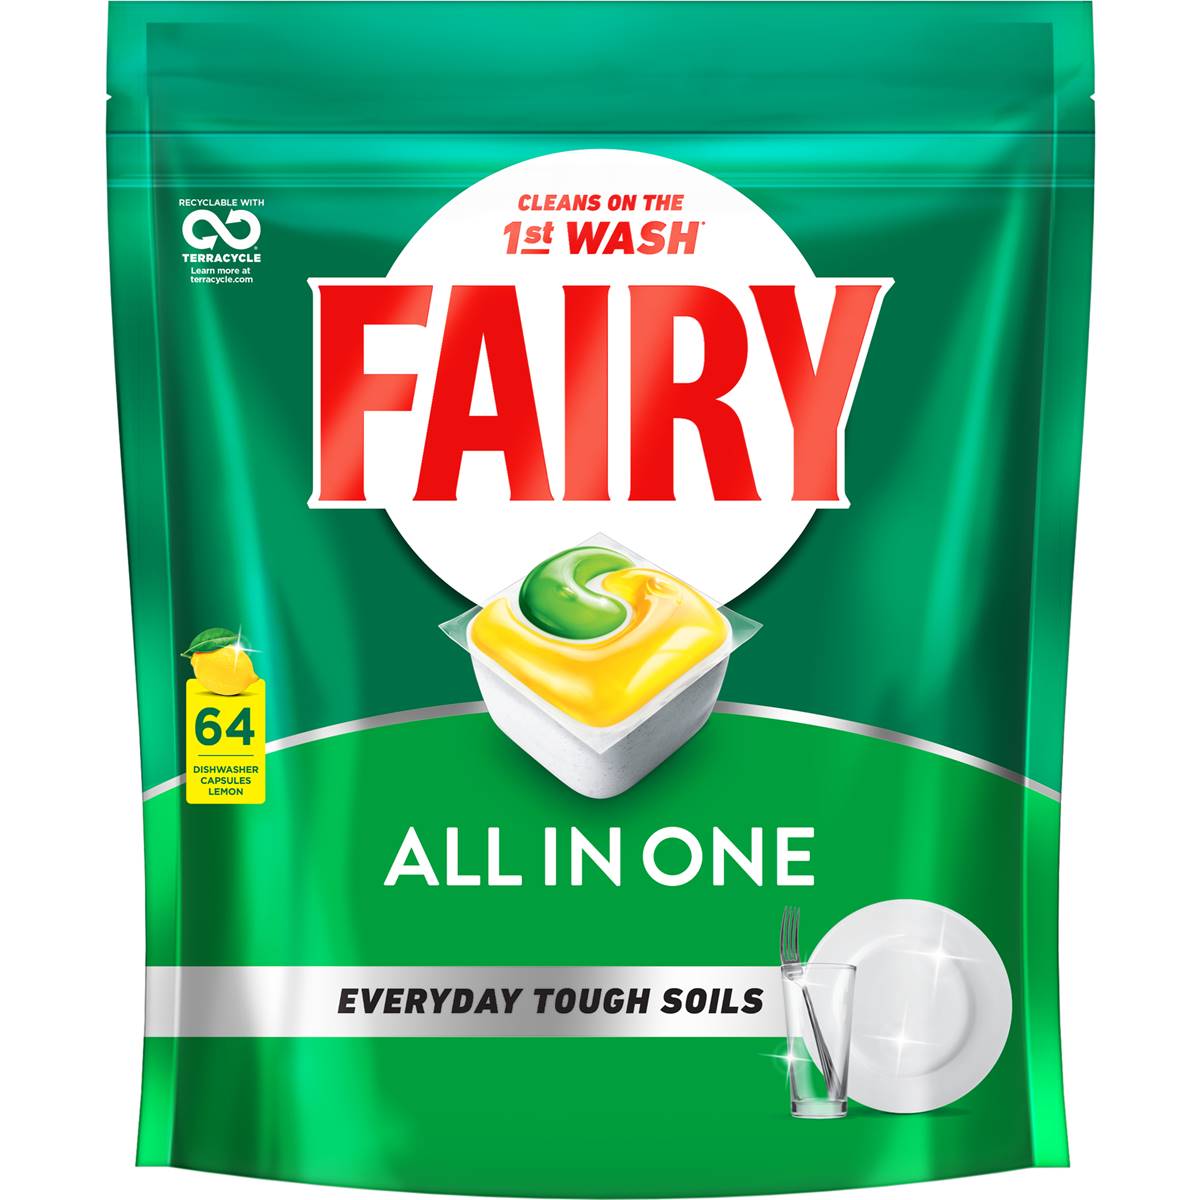 Fairy Original All In One Lemon Automatic Dishwasher Tablets 64 Pack